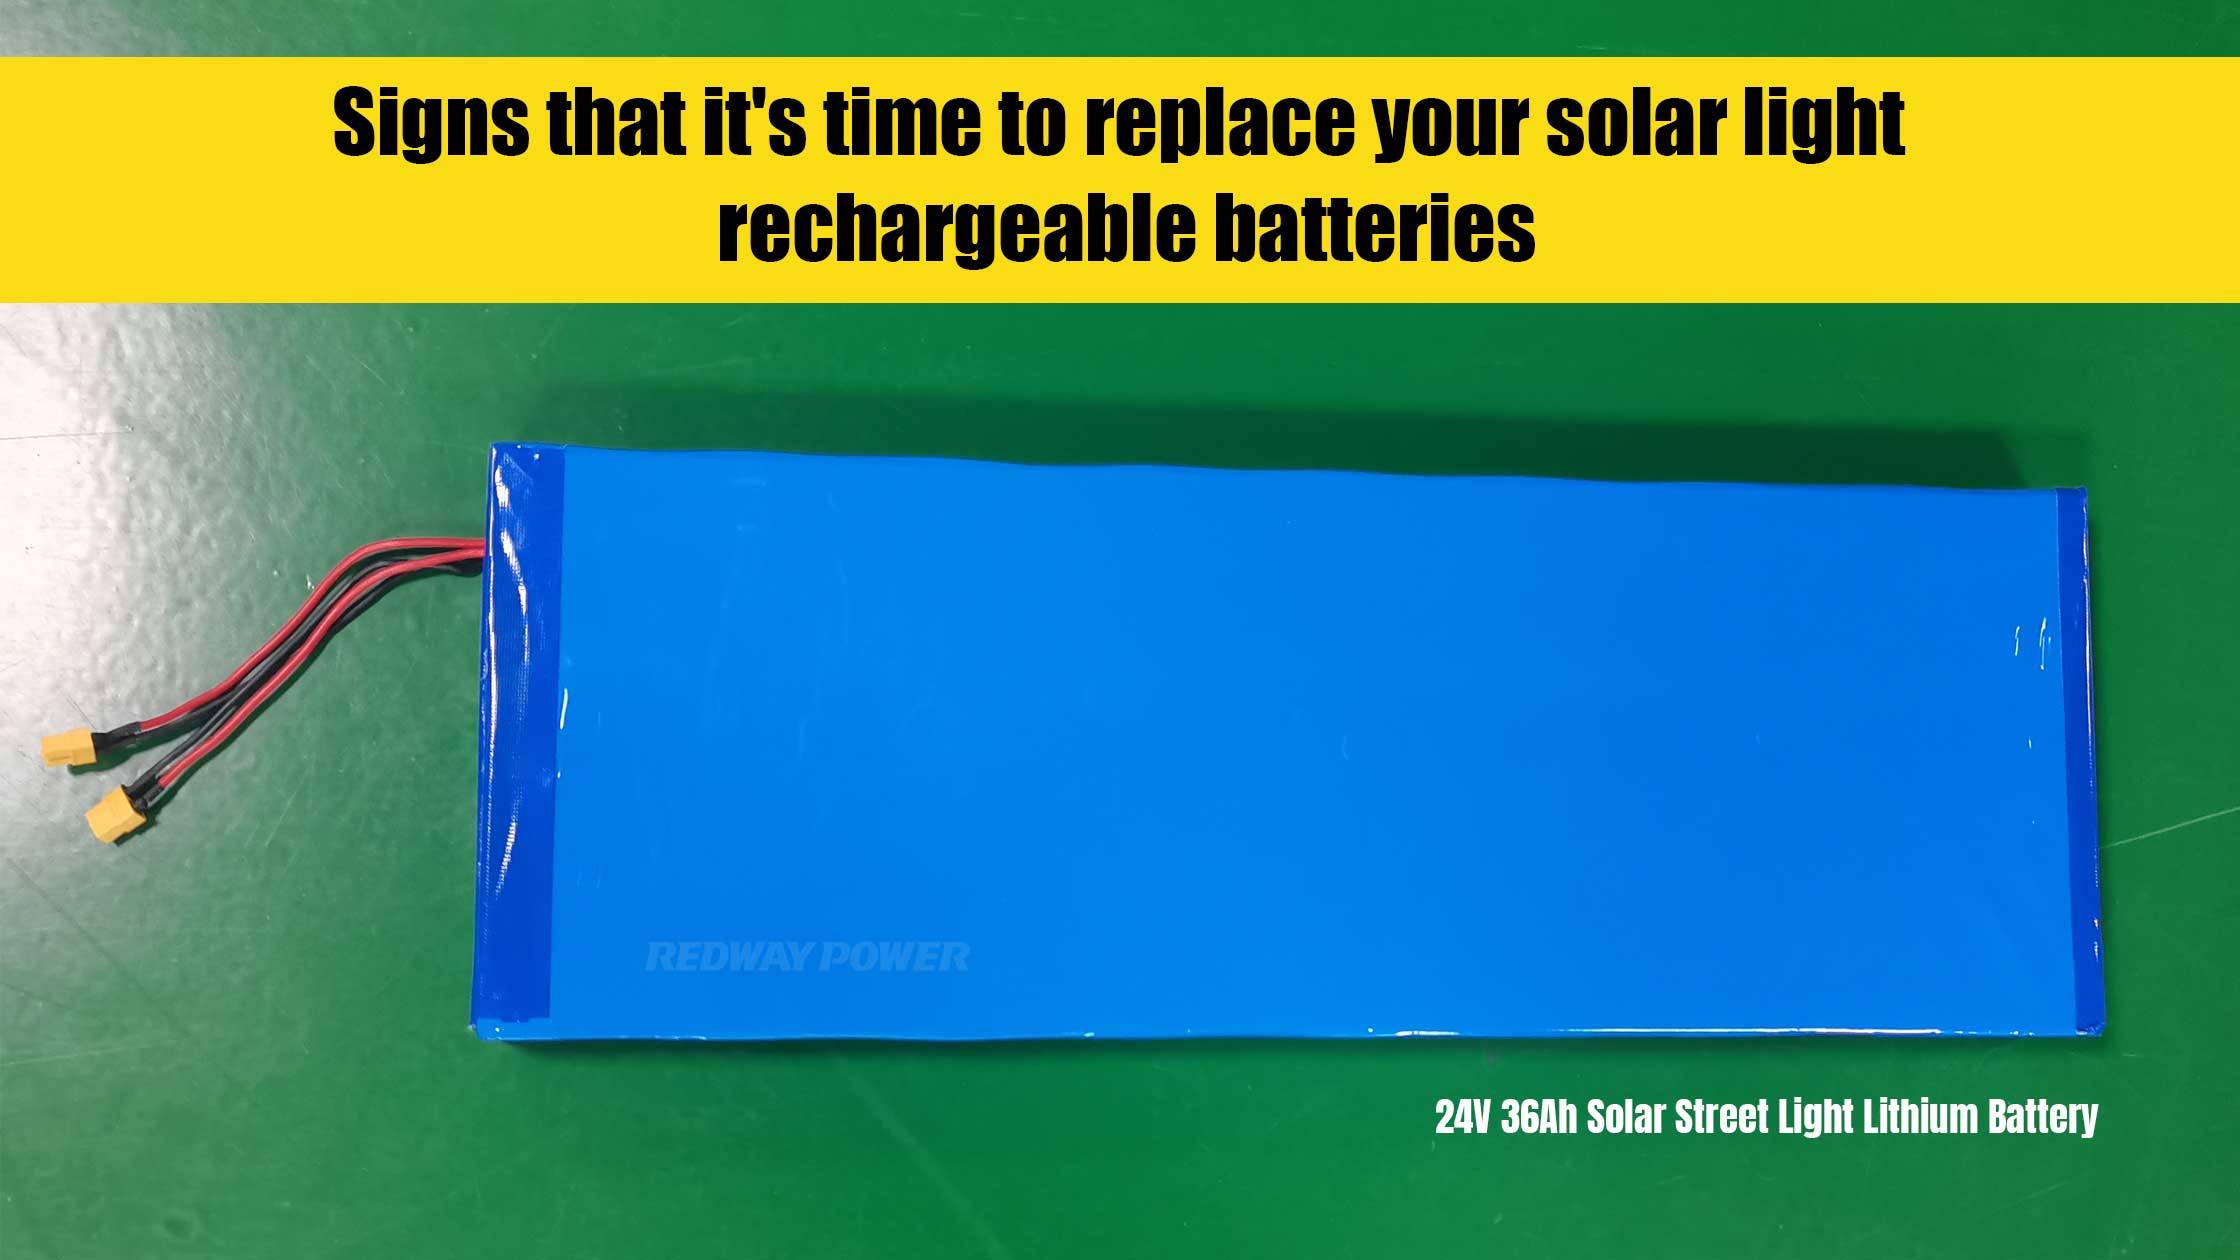 Signs that it's time to replace your rechargeable batteries, Is it worth replacing rechargeable batteries in solar lights? 24v 30ah 36ah